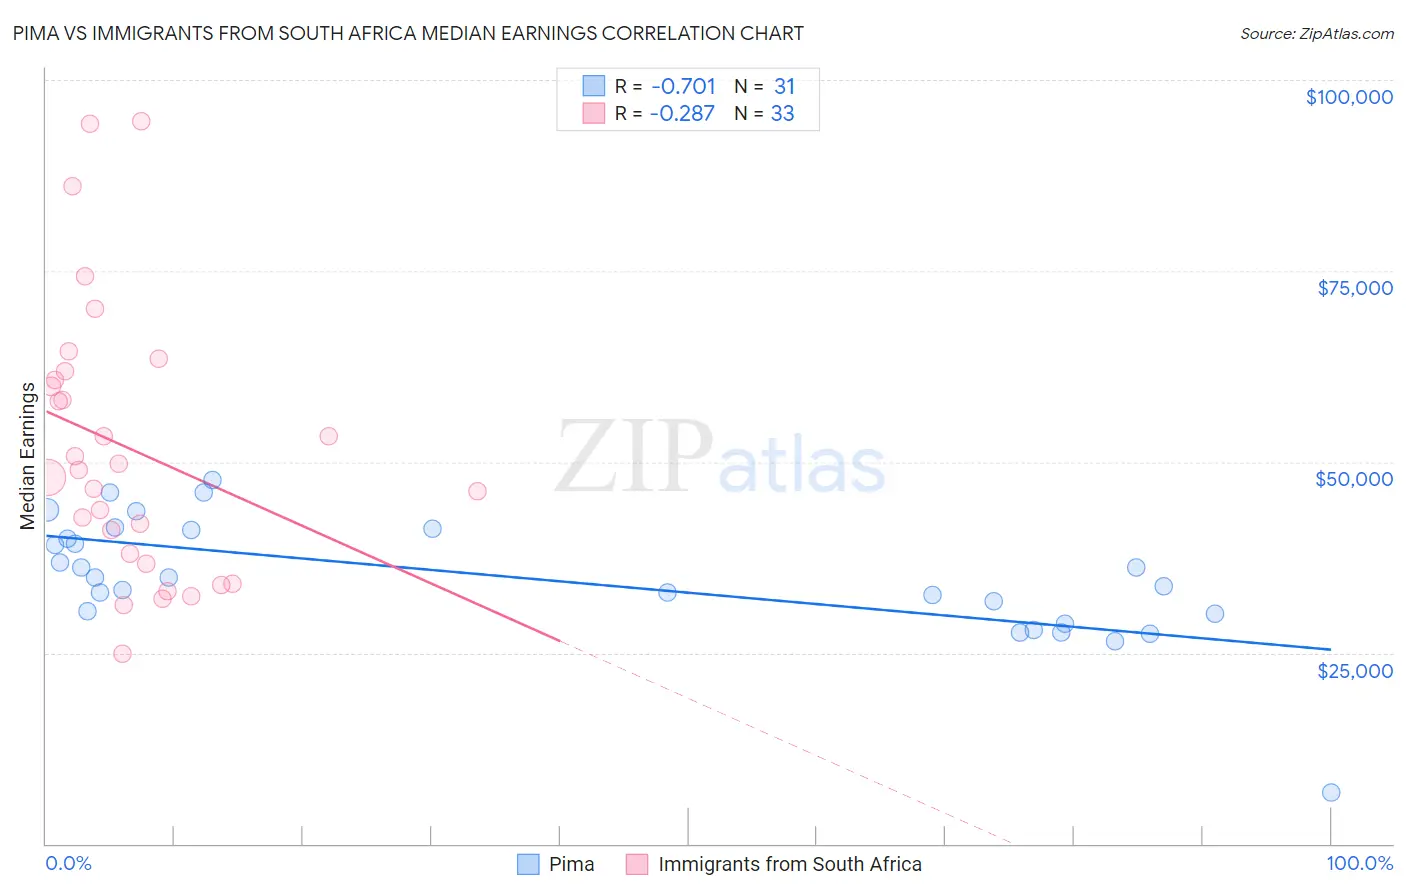 Pima vs Immigrants from South Africa Median Earnings